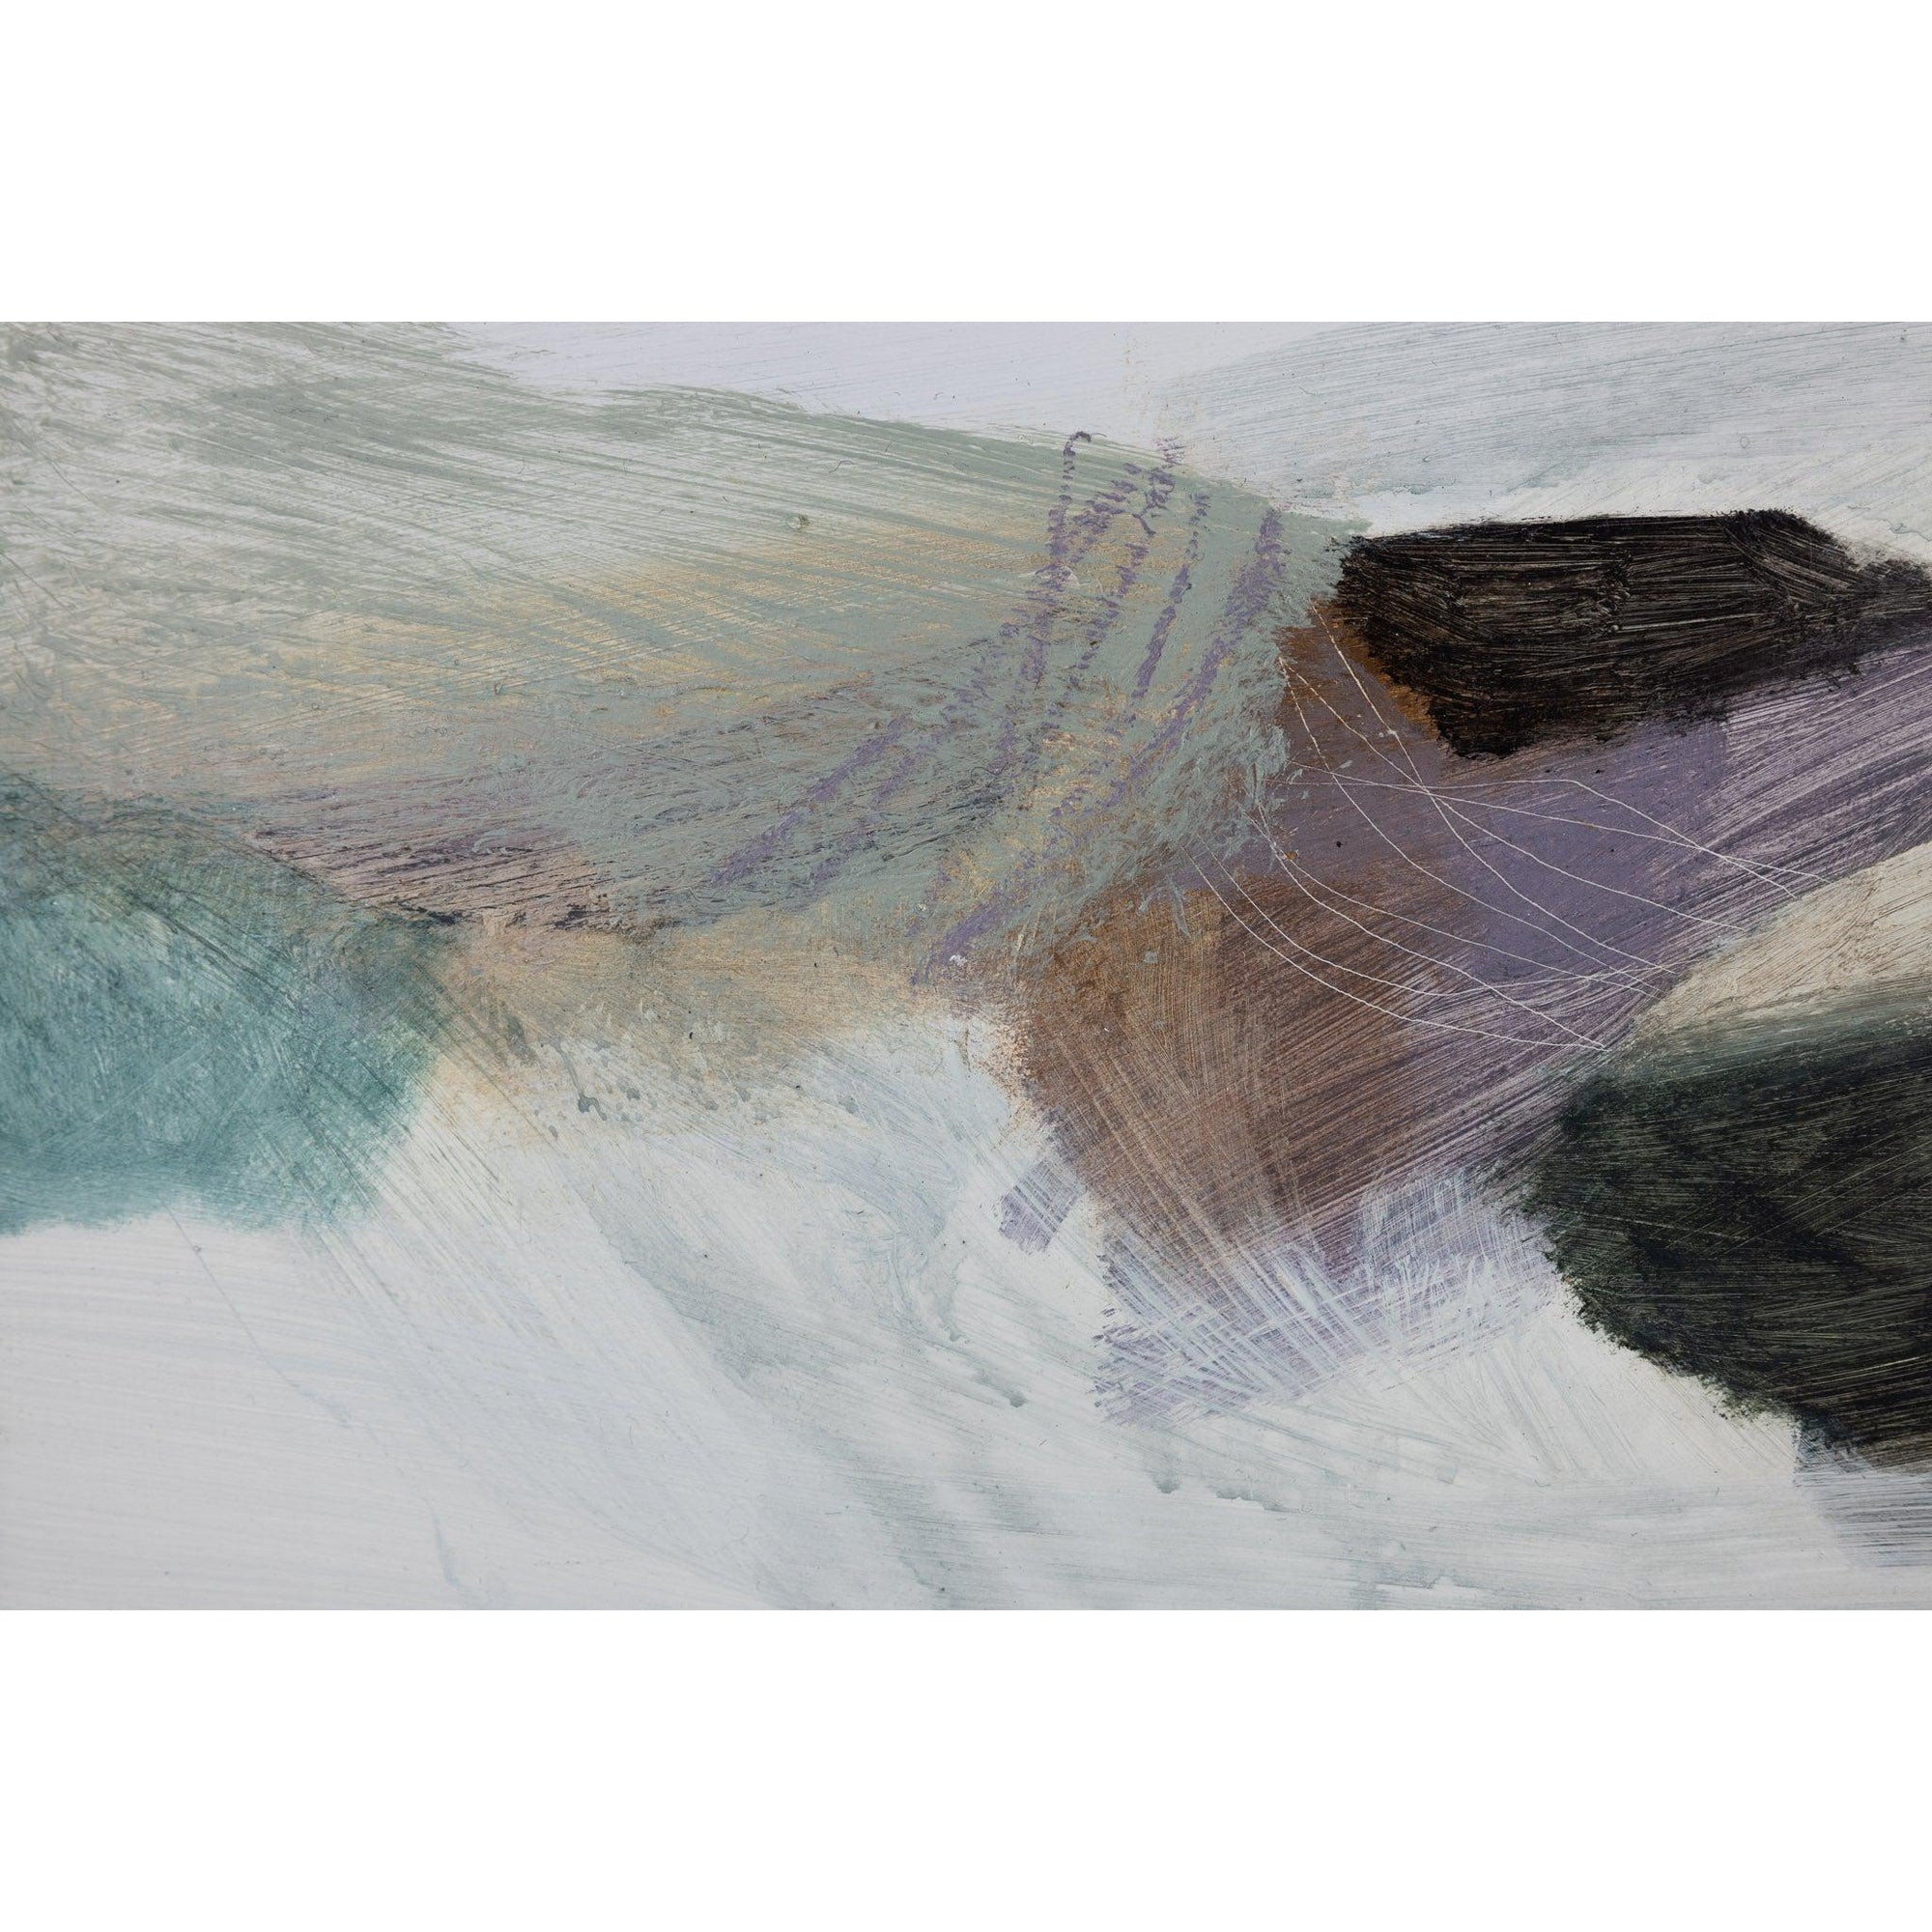 Shifting Colours 3, mixed media by Karen Birchwood, available from Padstow Gallery, Cornwall